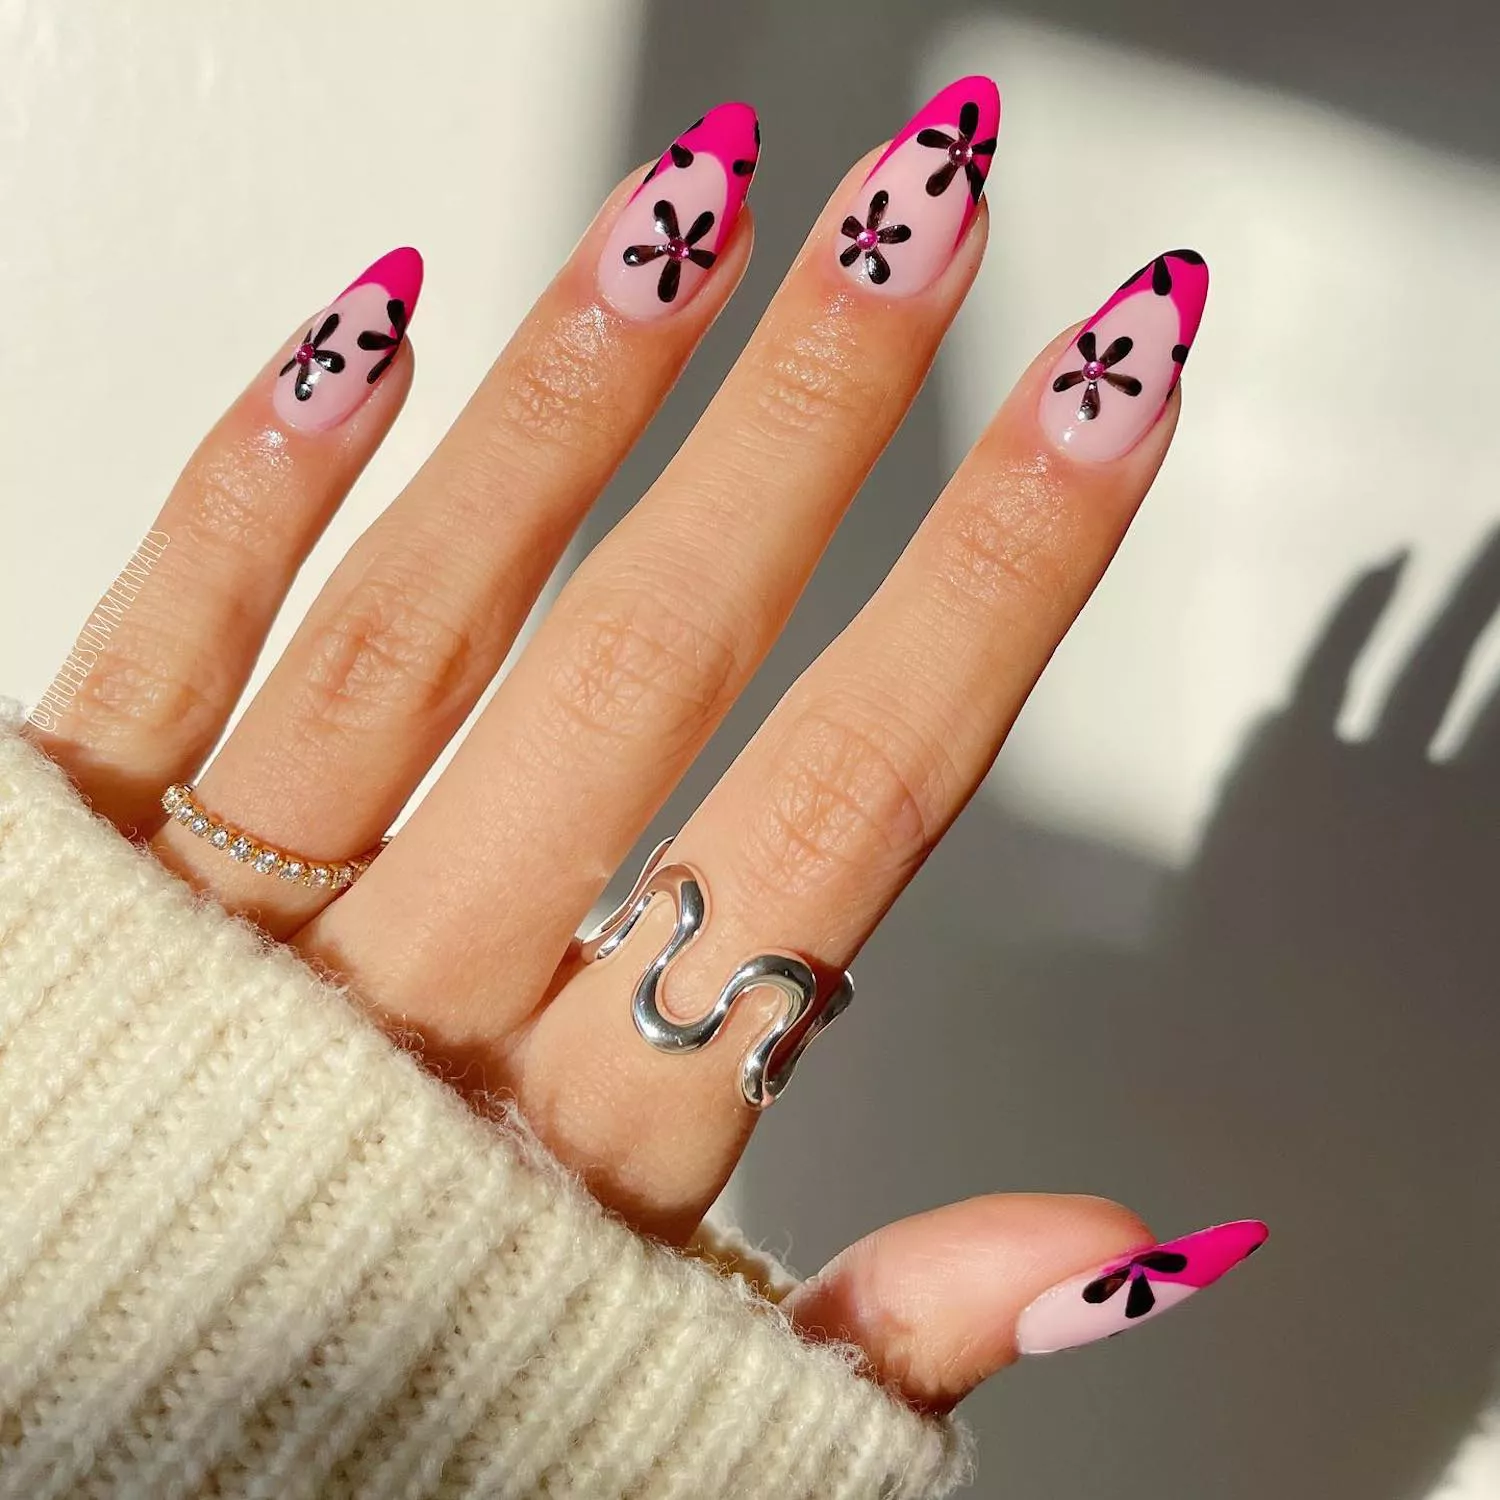 Manicure with hot pink French tips and black floral design with pink rhinestones